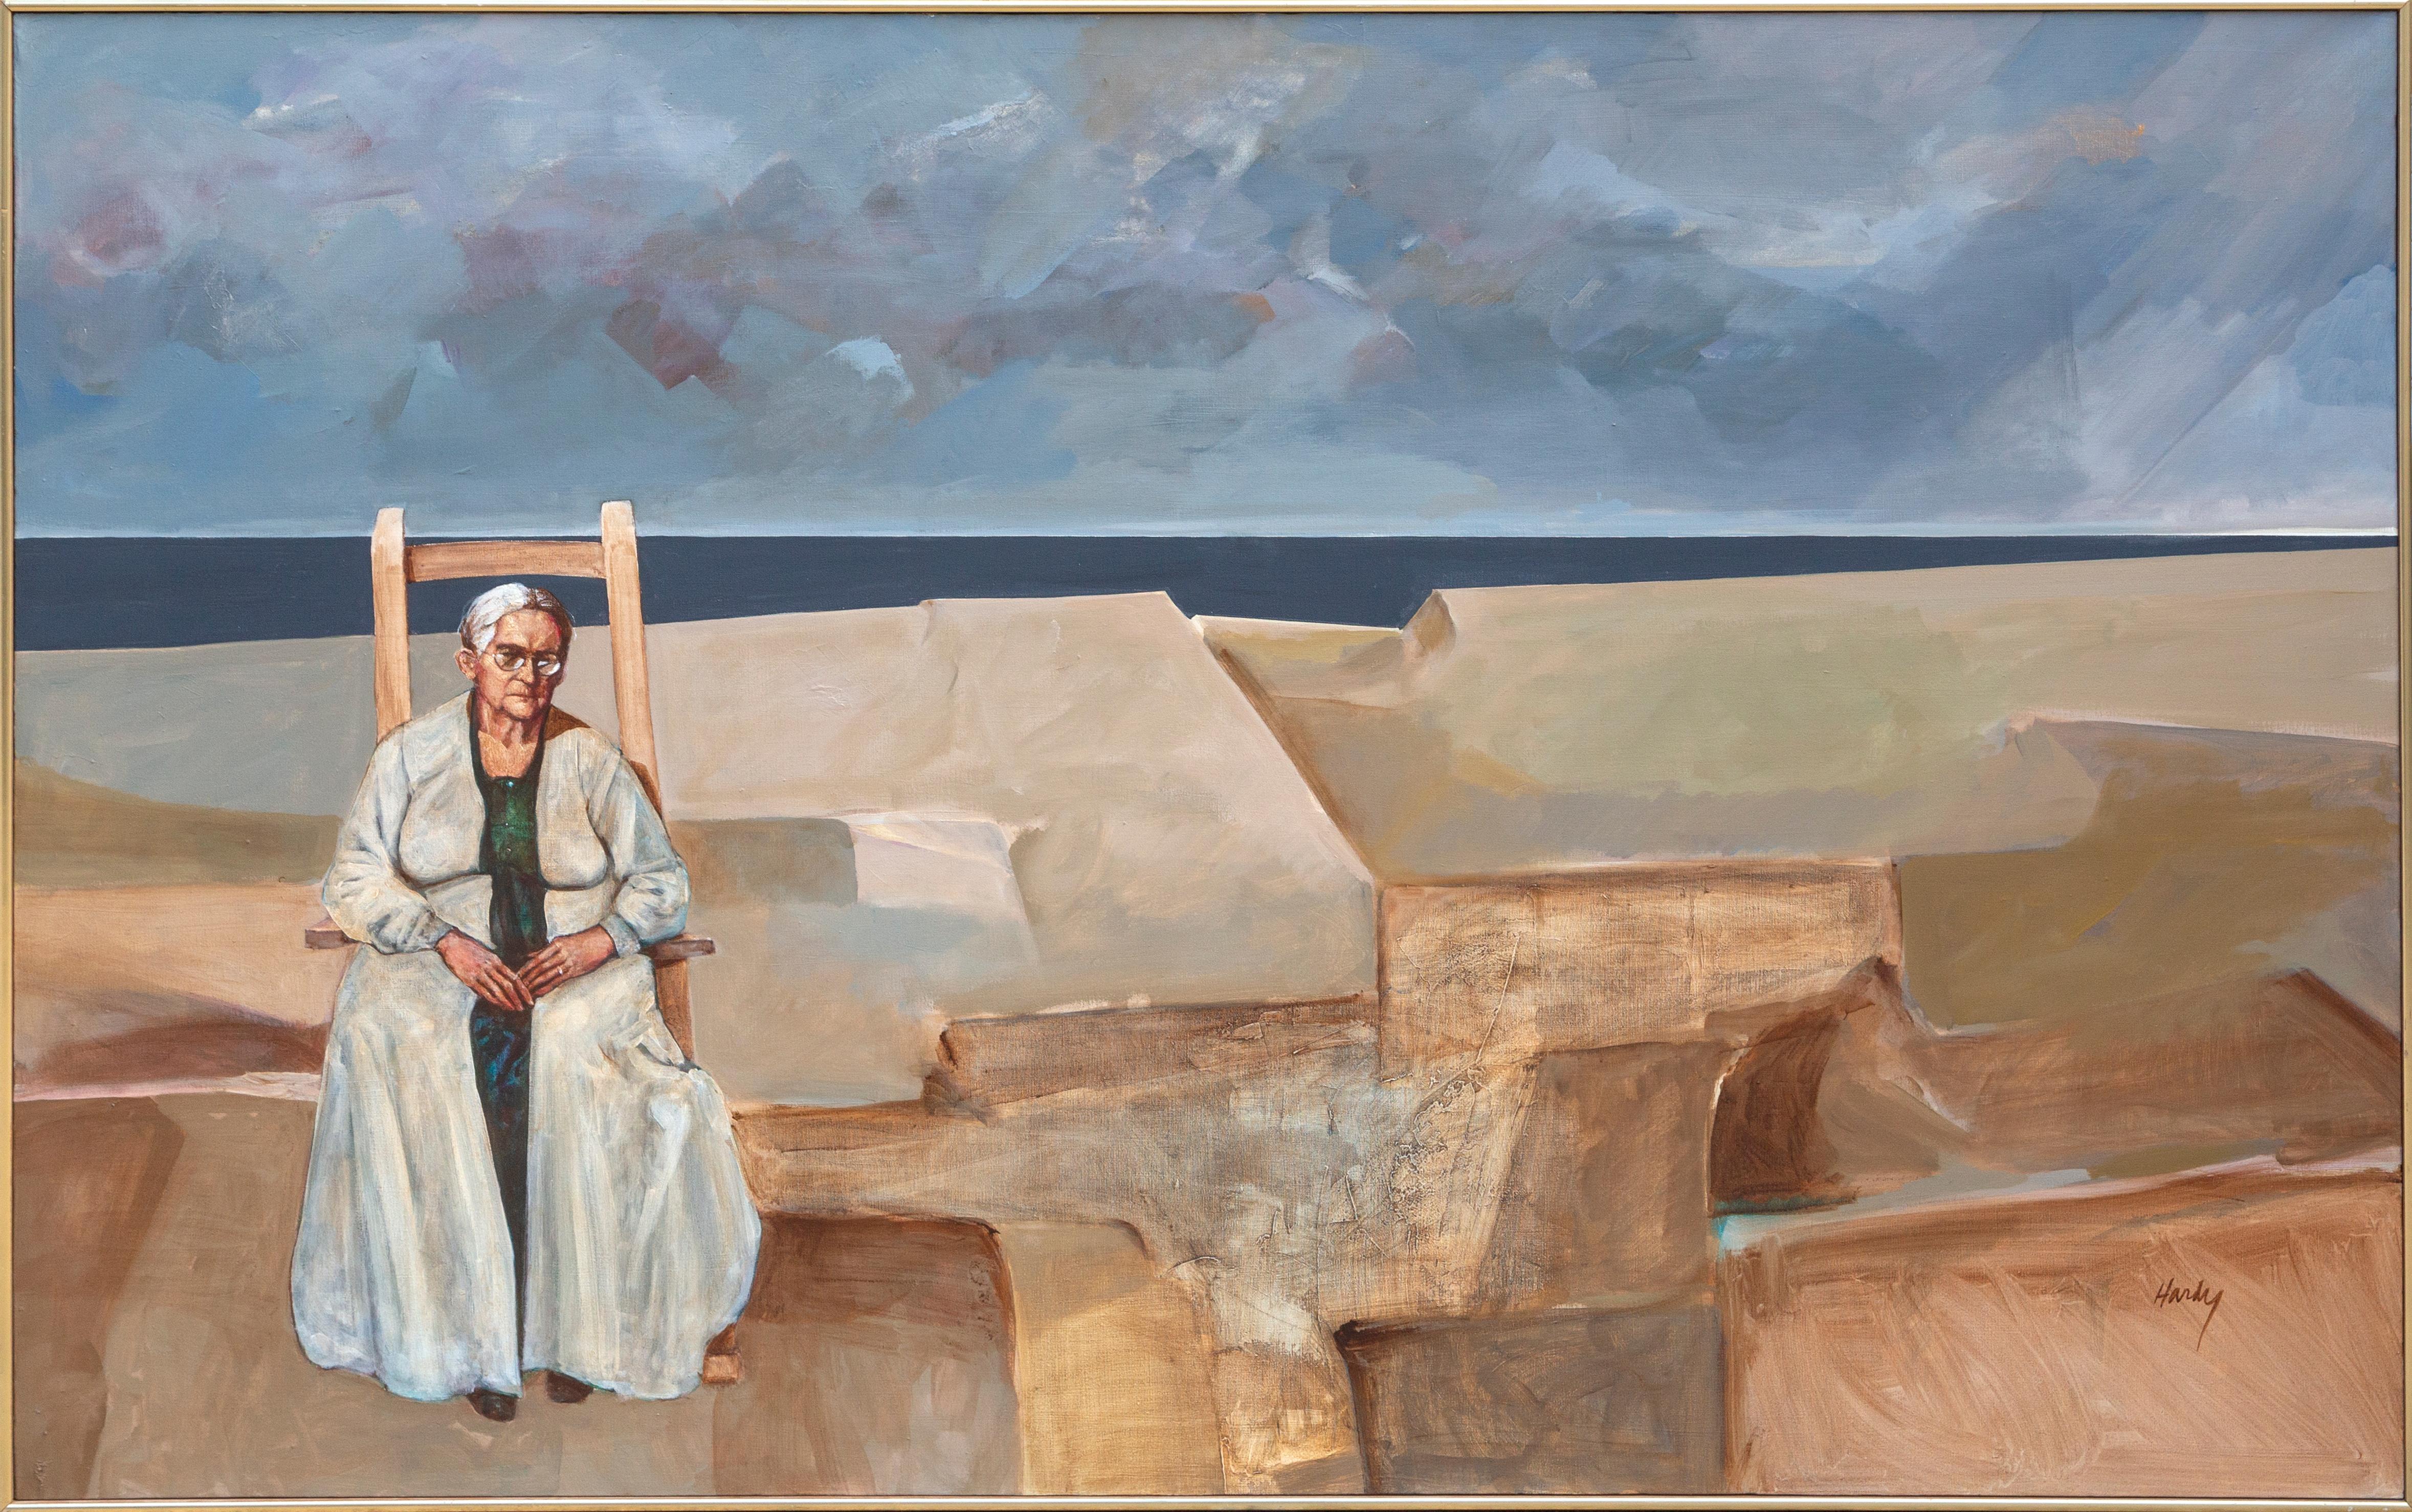 Artist: John Hardy, American (1923 - 2014)
Title: Grandmother at Shore
Year: circa 1974
Medium: Acrylic on Canvas, signed l.r.
Size: 46 x 70 in. (116.84 x 177.8 cm)